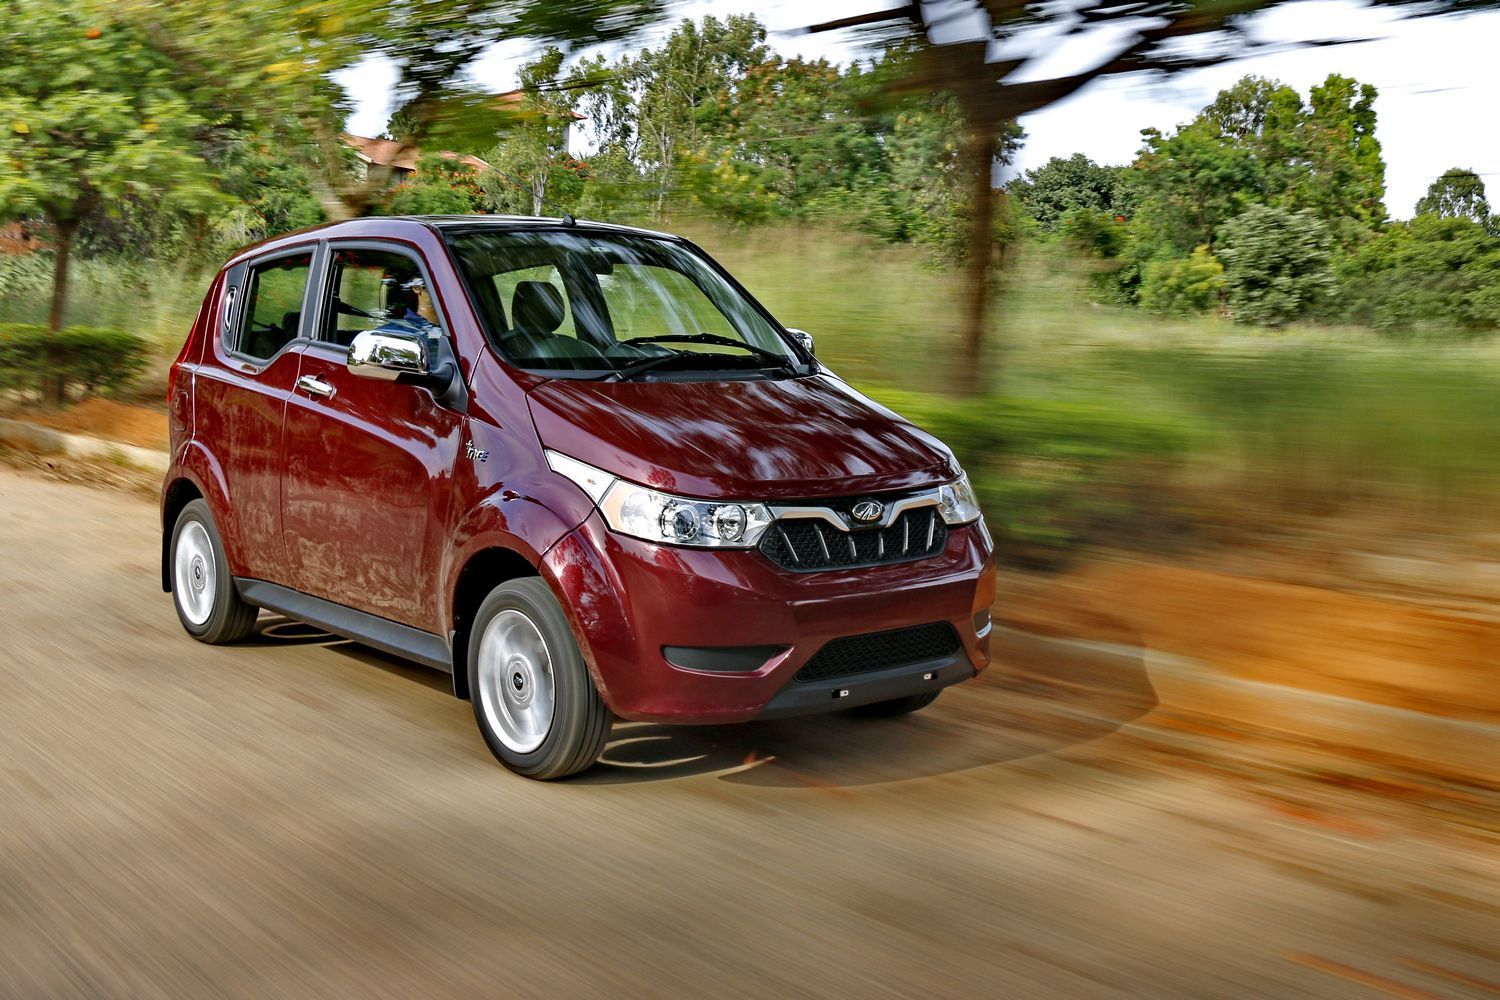 Mahindra e2oPlus First Drive Review